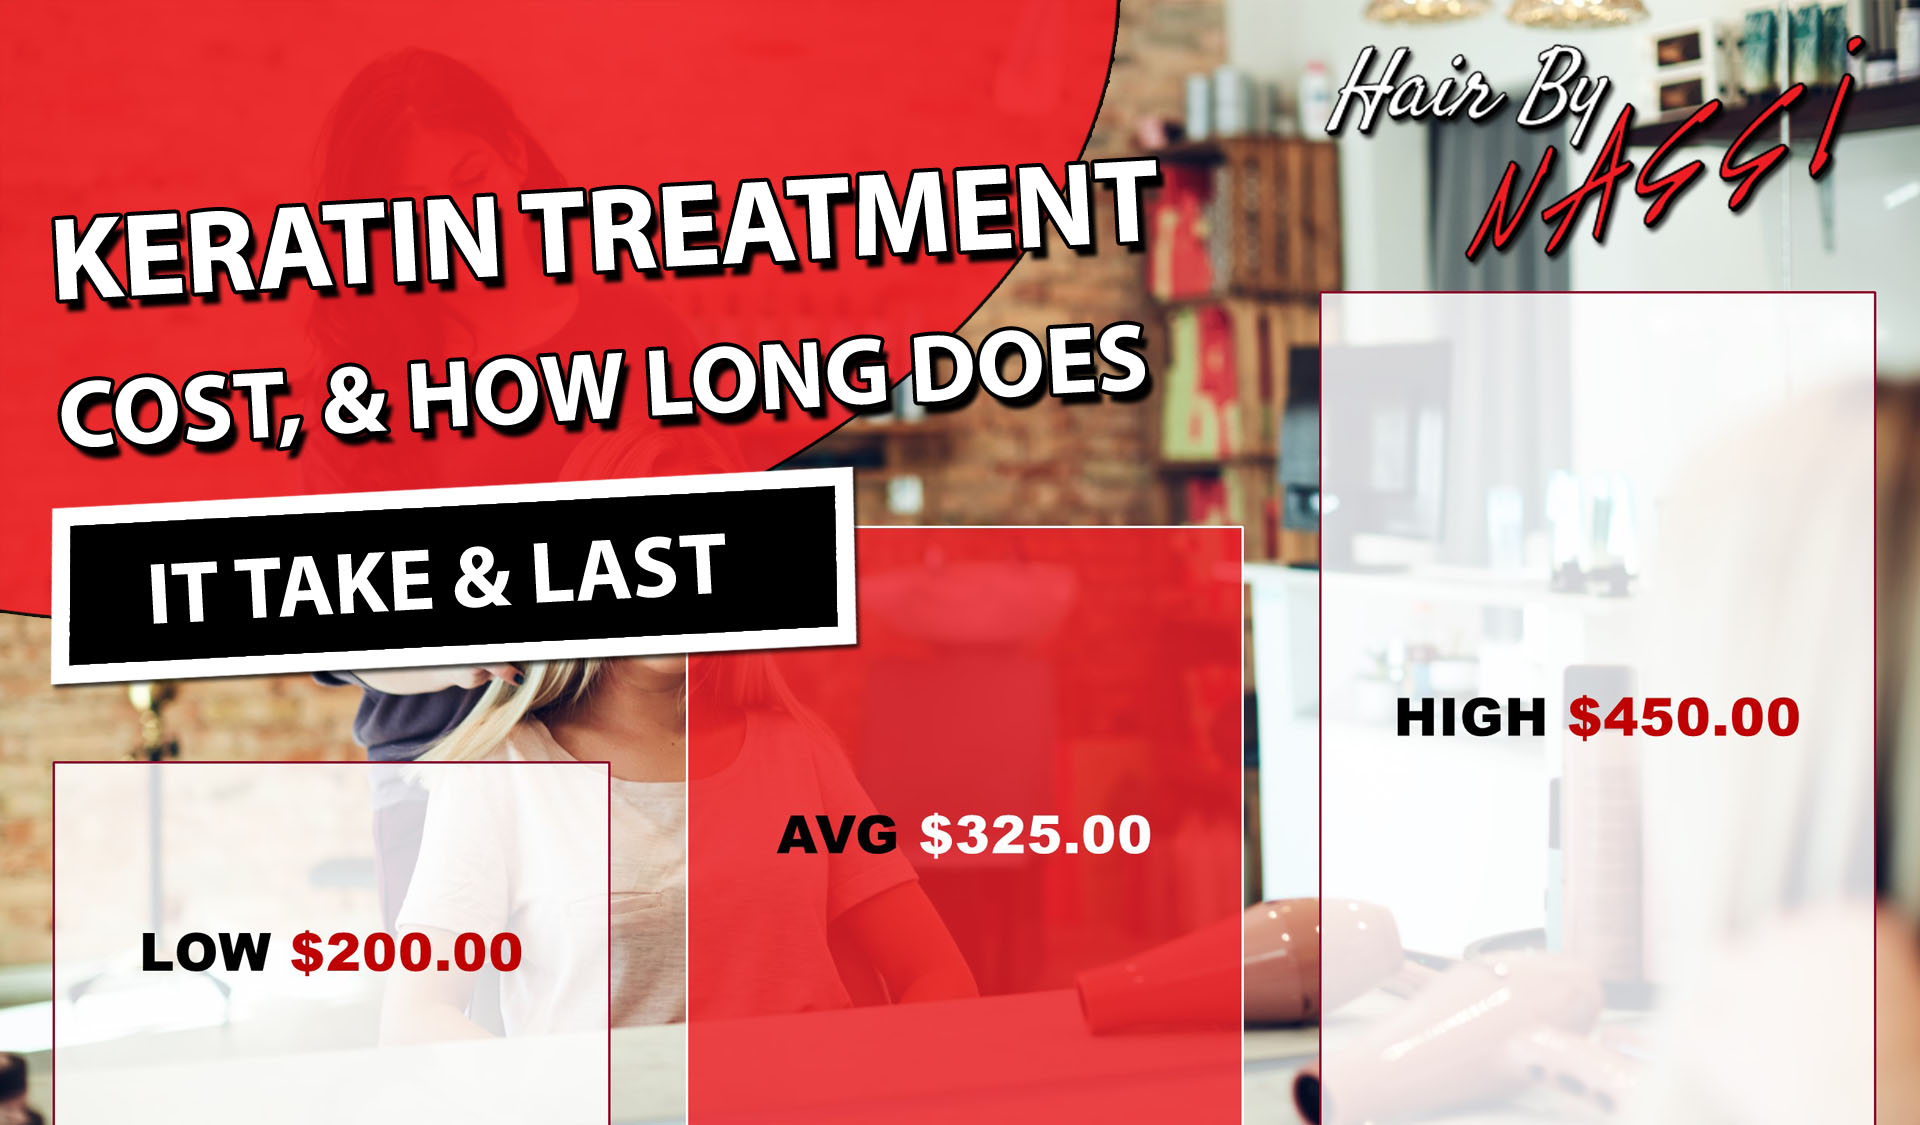 KERATIN TREATMENT COST - HOW LONG DOES IT LAST & TAKE